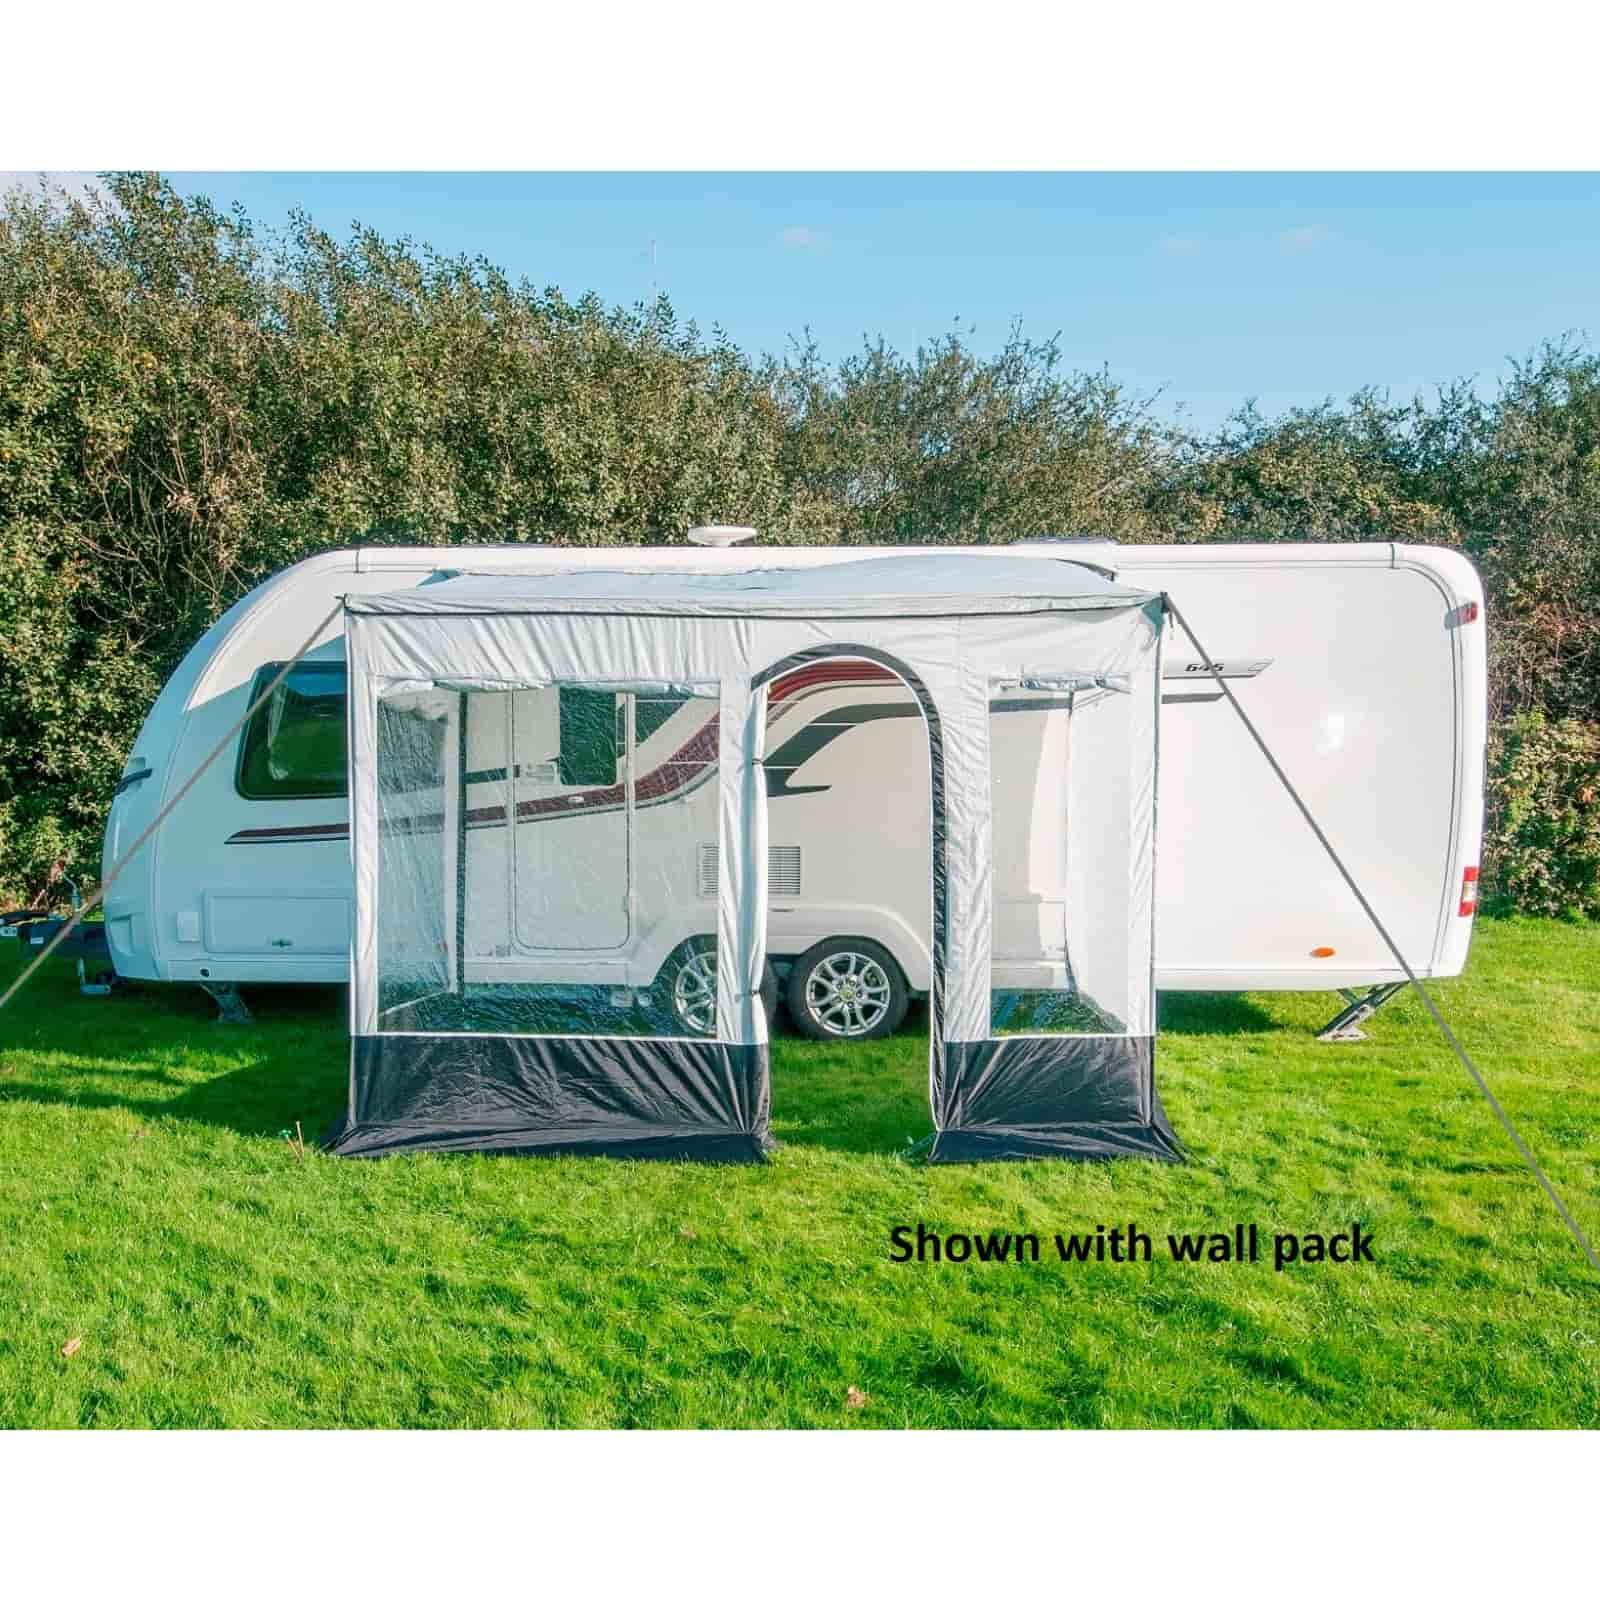 Sunncamp Protekta 10 Wall Pack for Awning Canopy - Quality Caravan Awnings